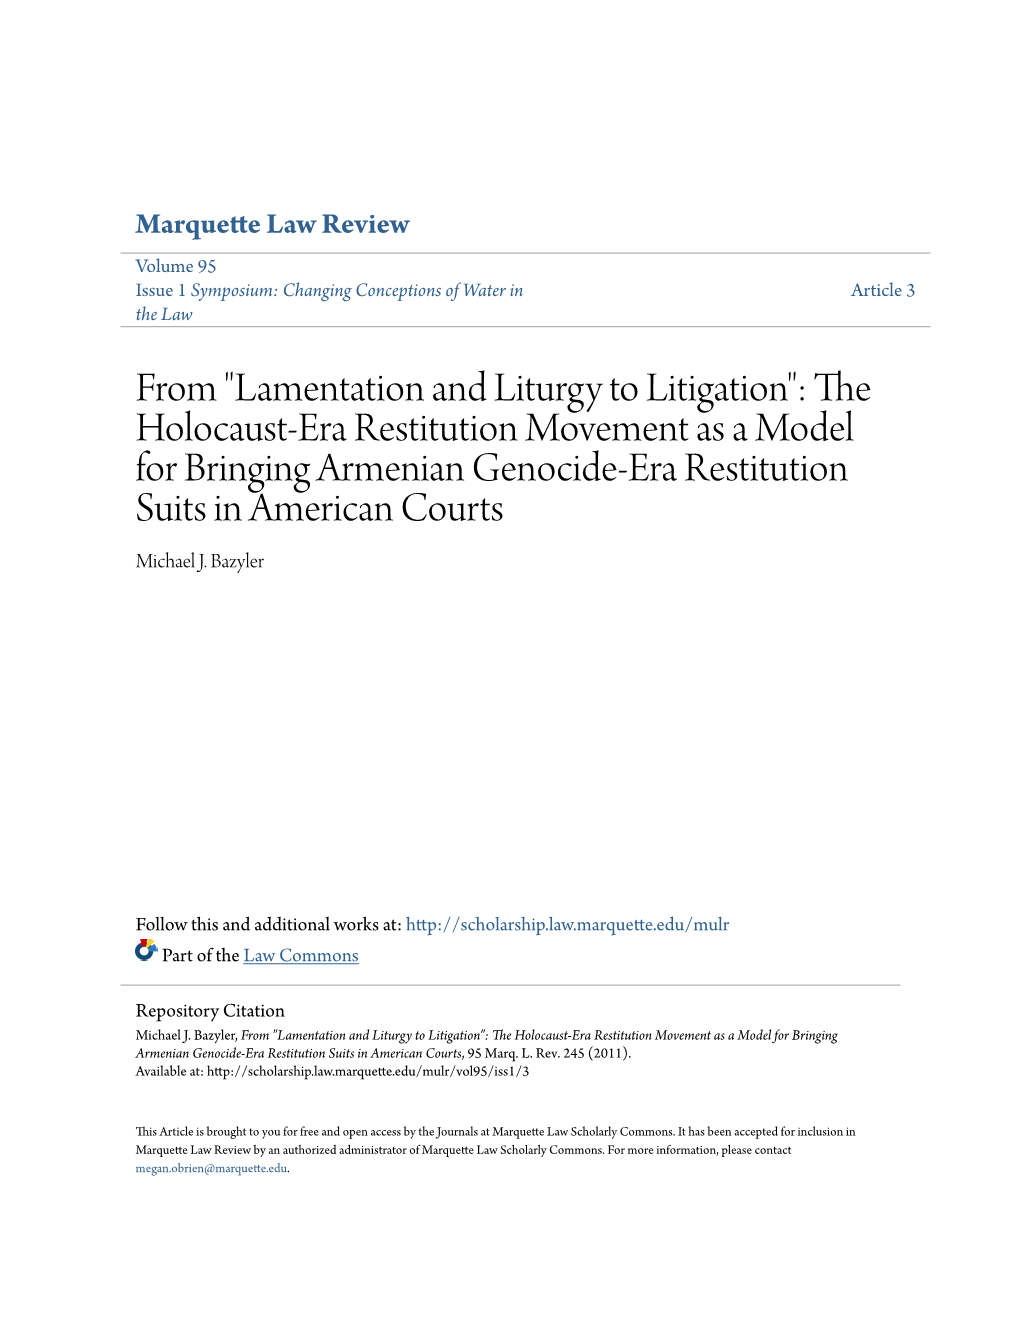 From "Lamentation and Liturgy to Litigation": the Holocaust-Era Restitution Movement As a Model for Bringing Armenian